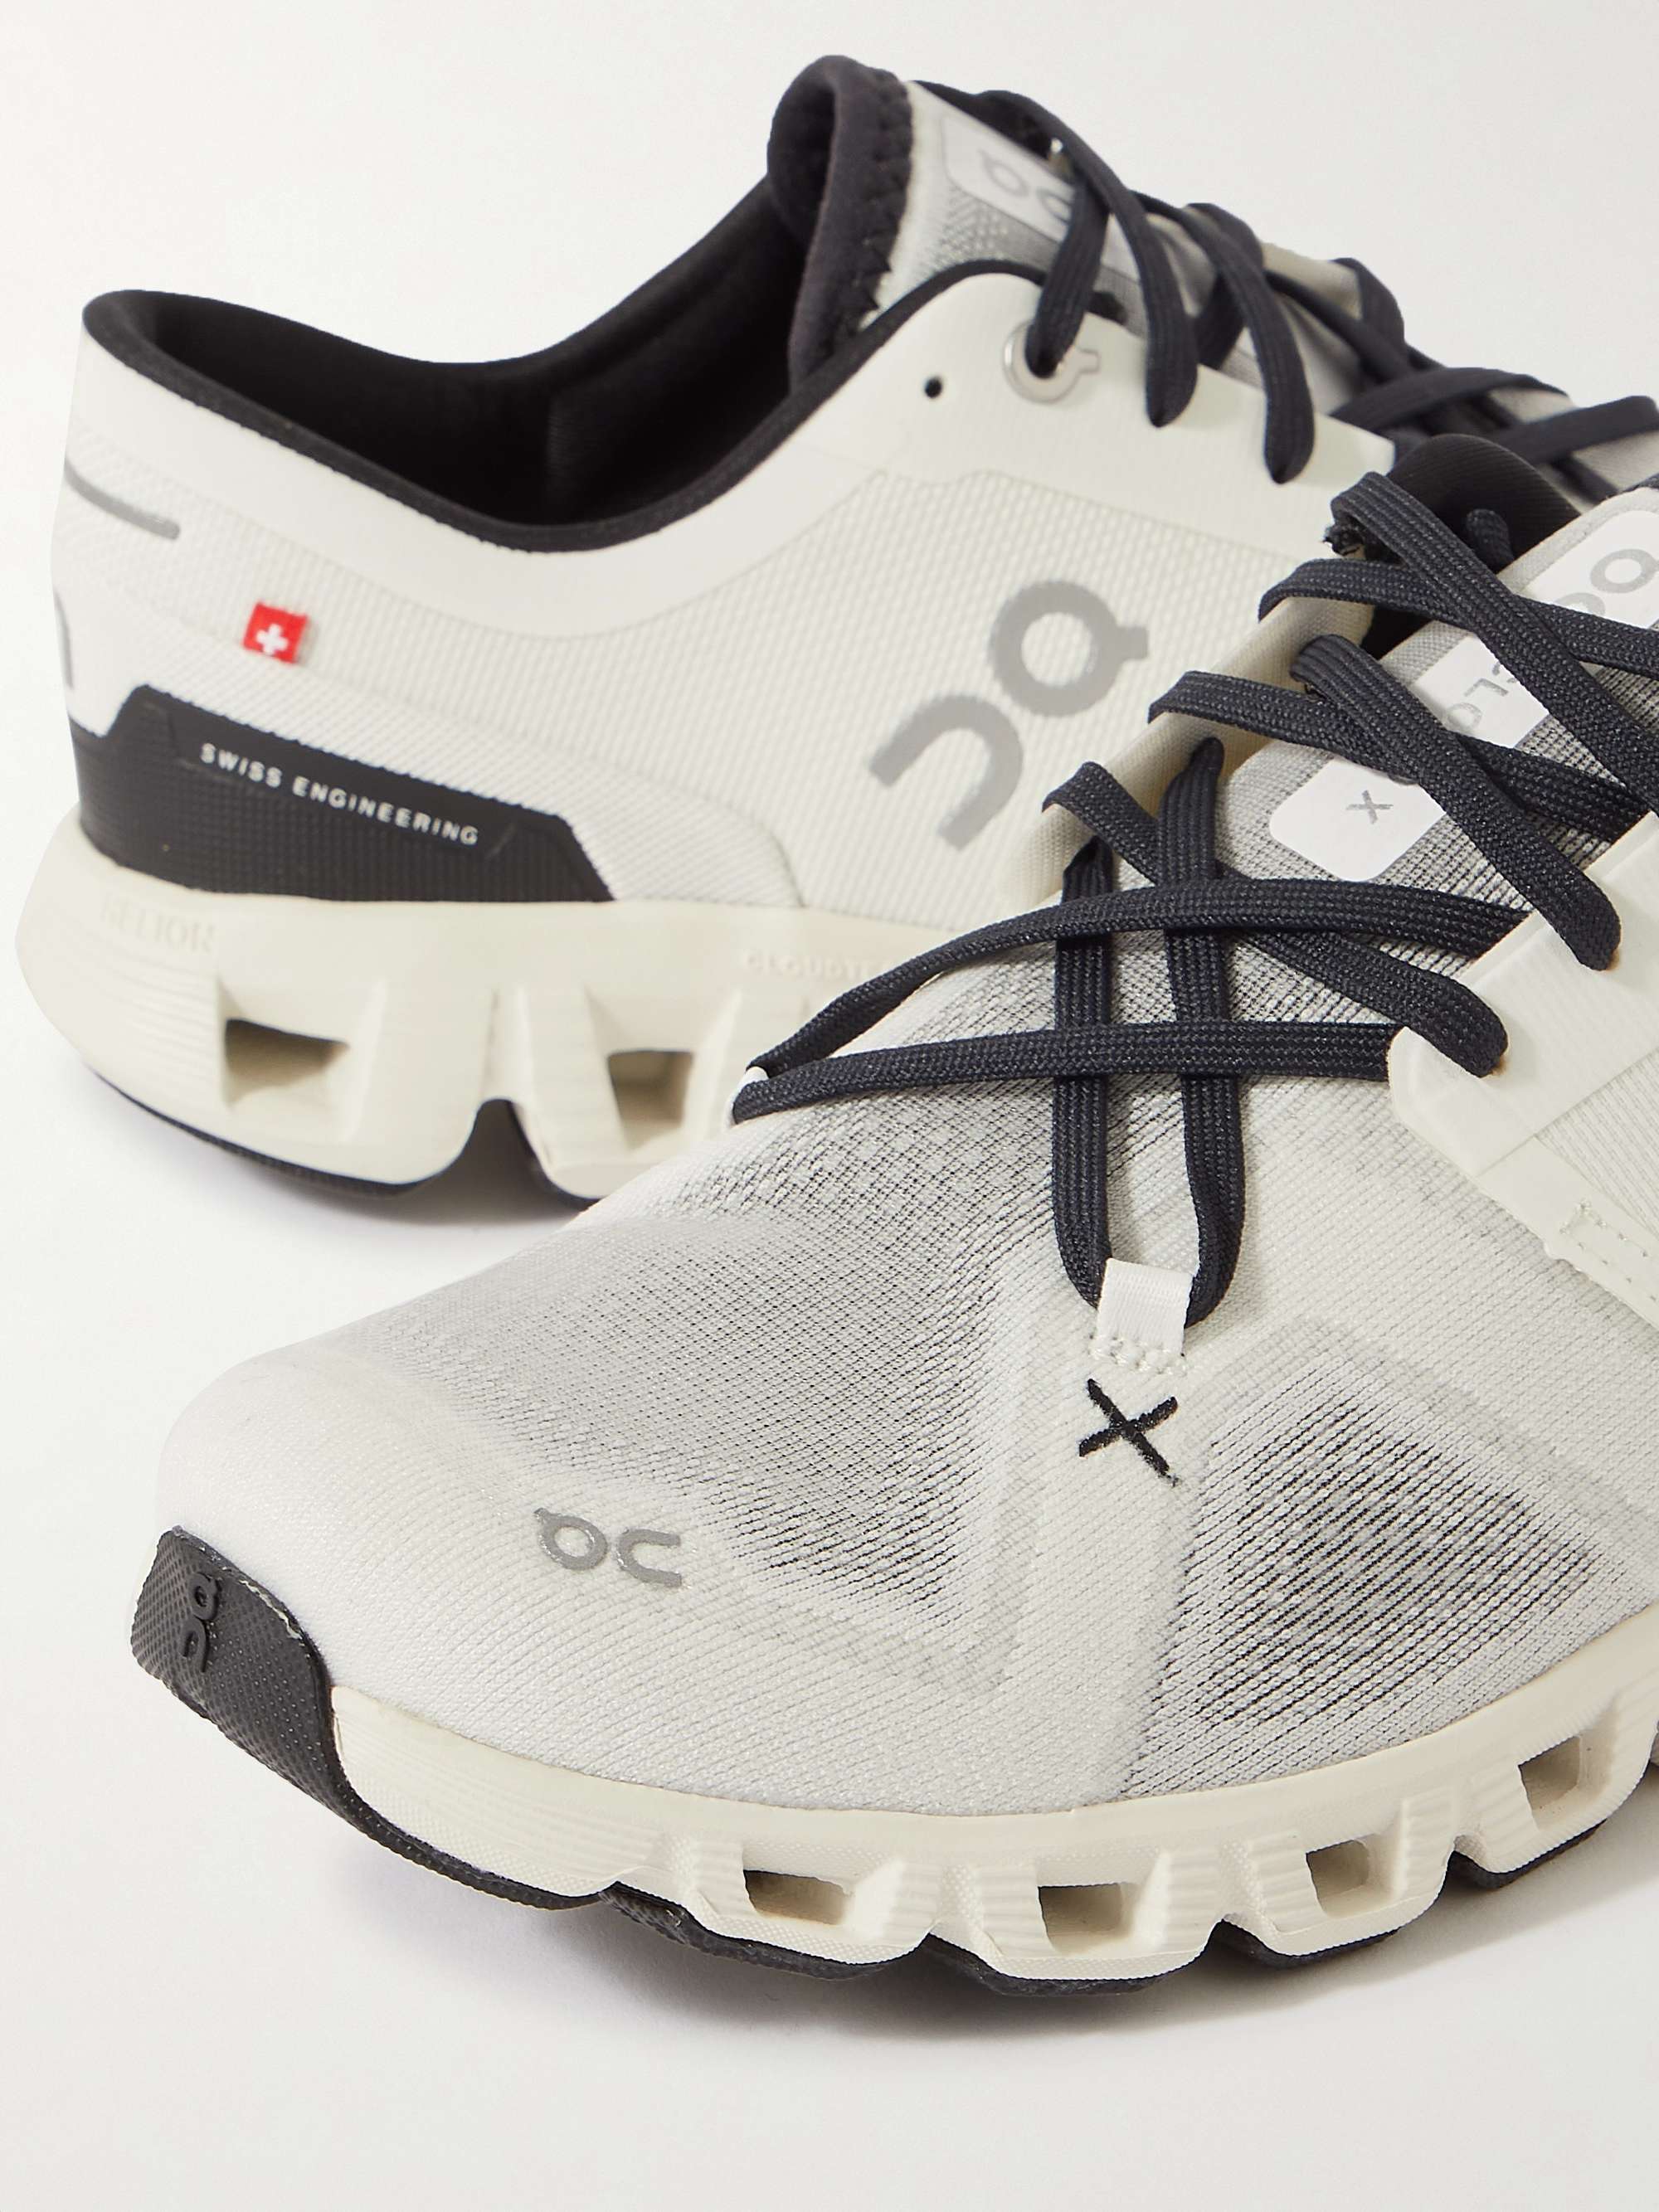 ON-RUNNING Cloud X3 Rubber-Trimmed Mesh Running Sneakers